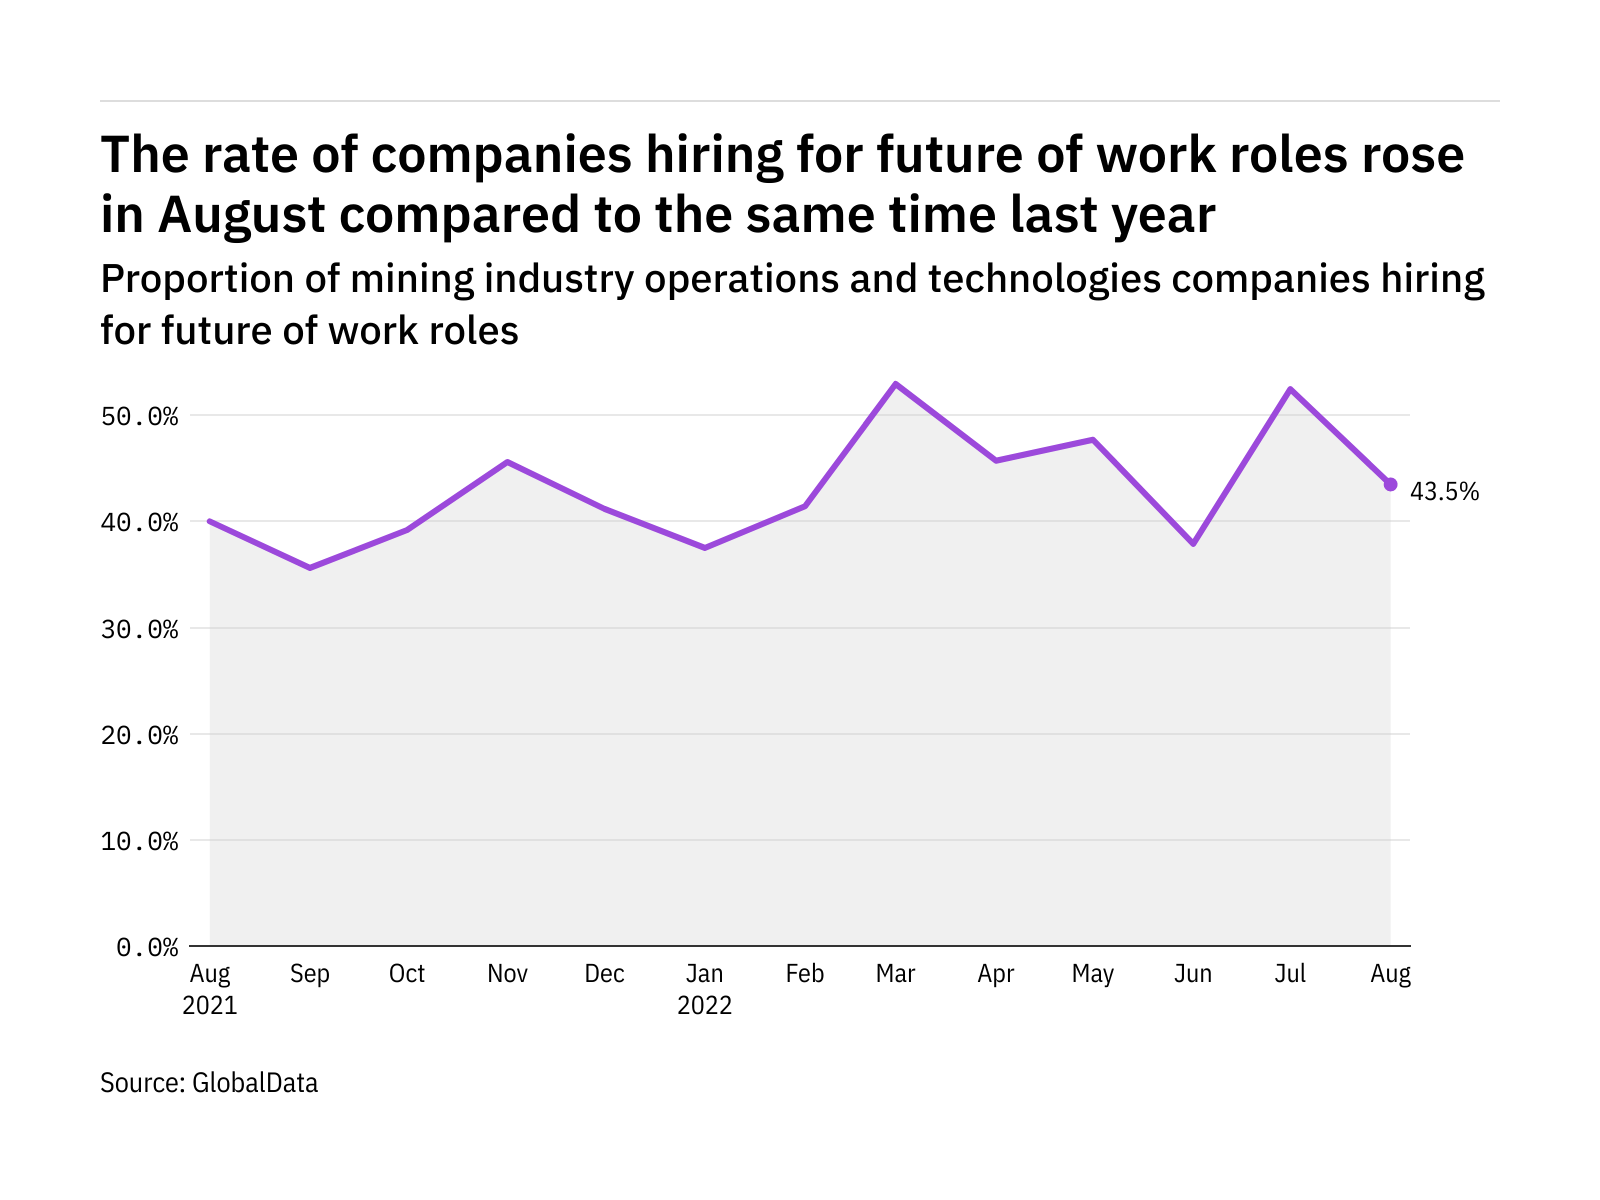 Future of work hiring levels in the mining industry rose in August 2022